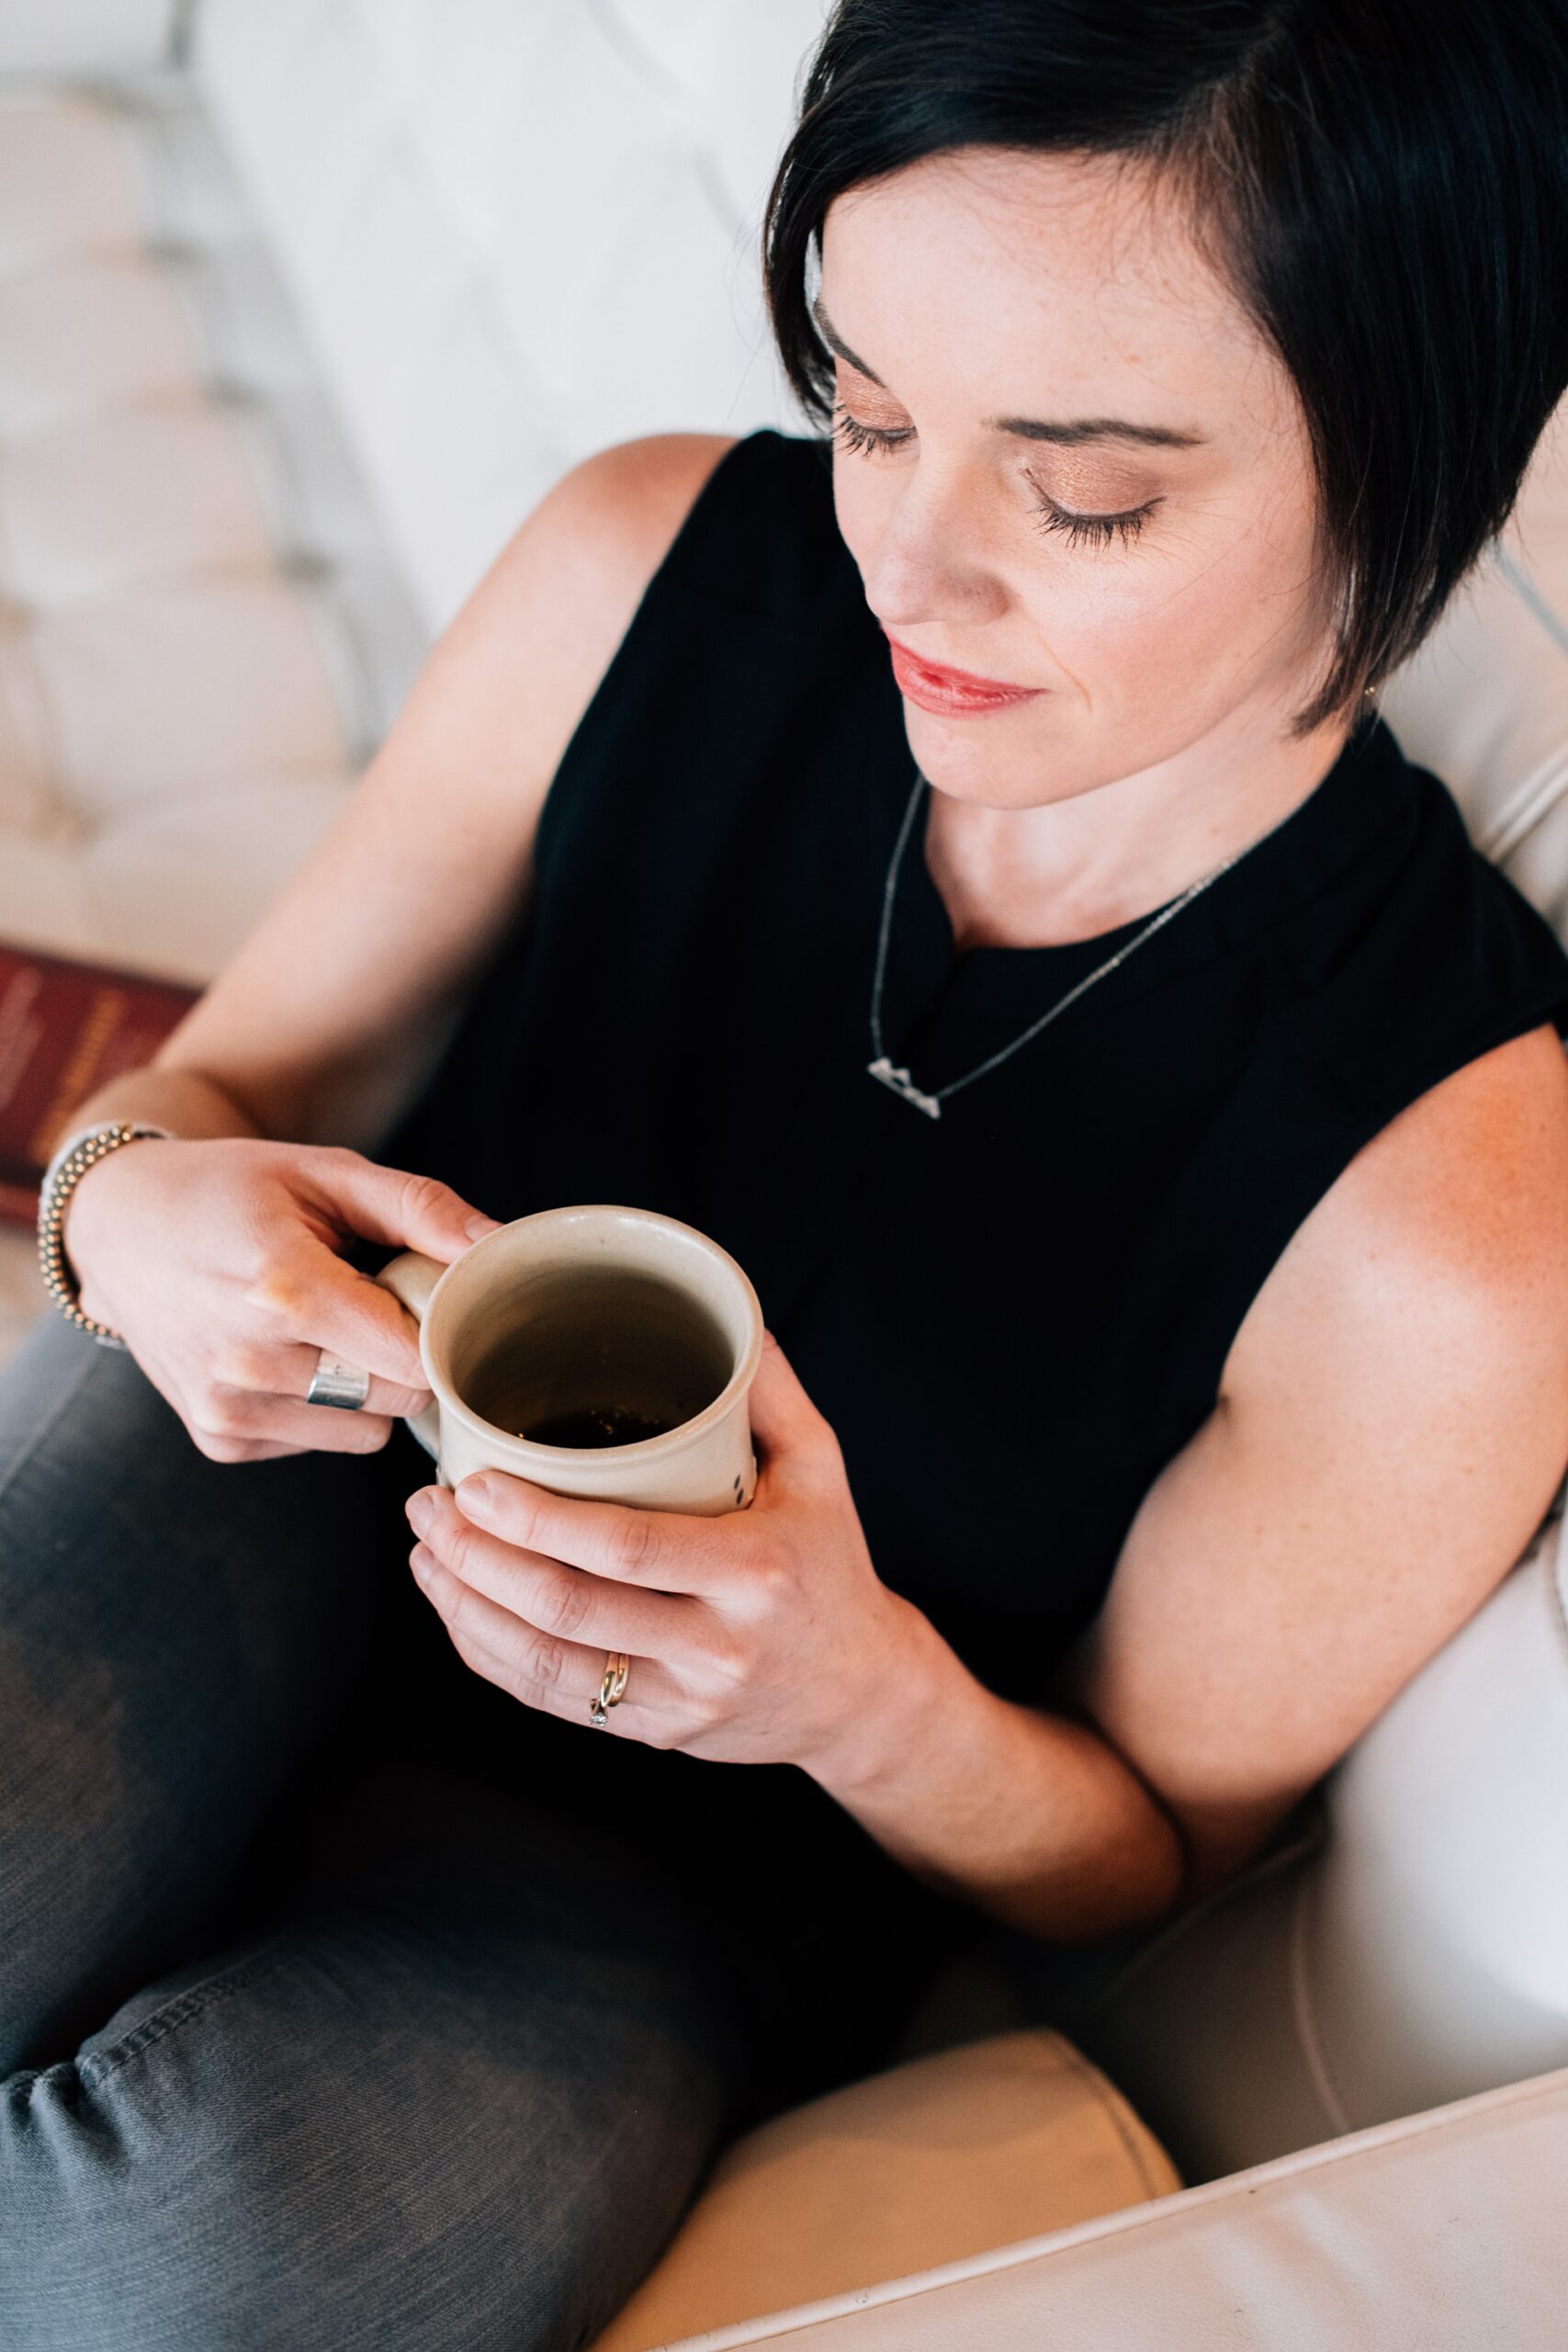 woman enjoying a cup of coffee as part of her self-care